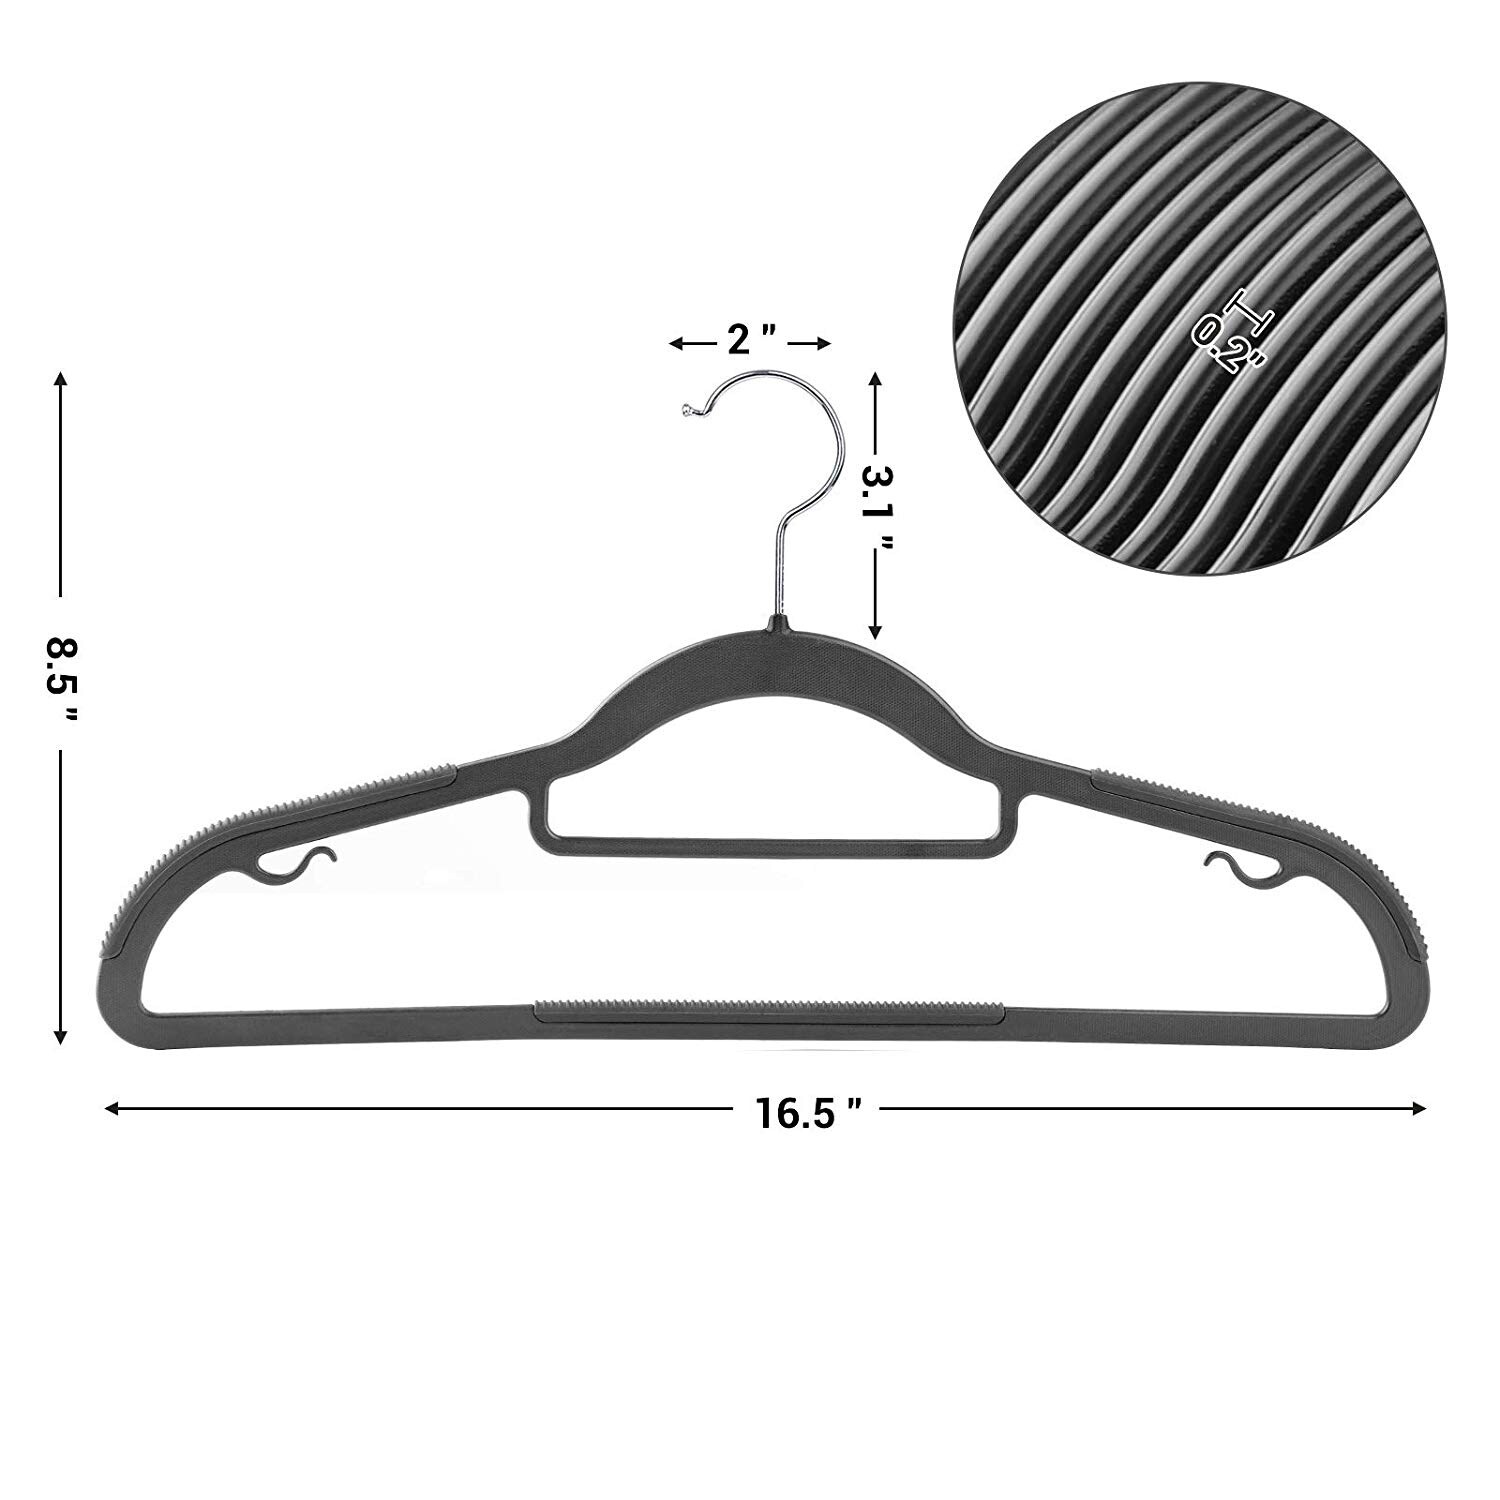 https://ak1.ostkcdn.com/images/products/is/images/direct/fdd8baa45458b393ef0dfadf3a3df5a9c0485706/Pack-of-50-Coat-Hangers%2C-Heavy-Duty-Plastic-Hangers-with-Non-Slip-Design%2C-Space-Saving-Clothes-Hangers%2C-0.2-Inch-Thickness.jpg